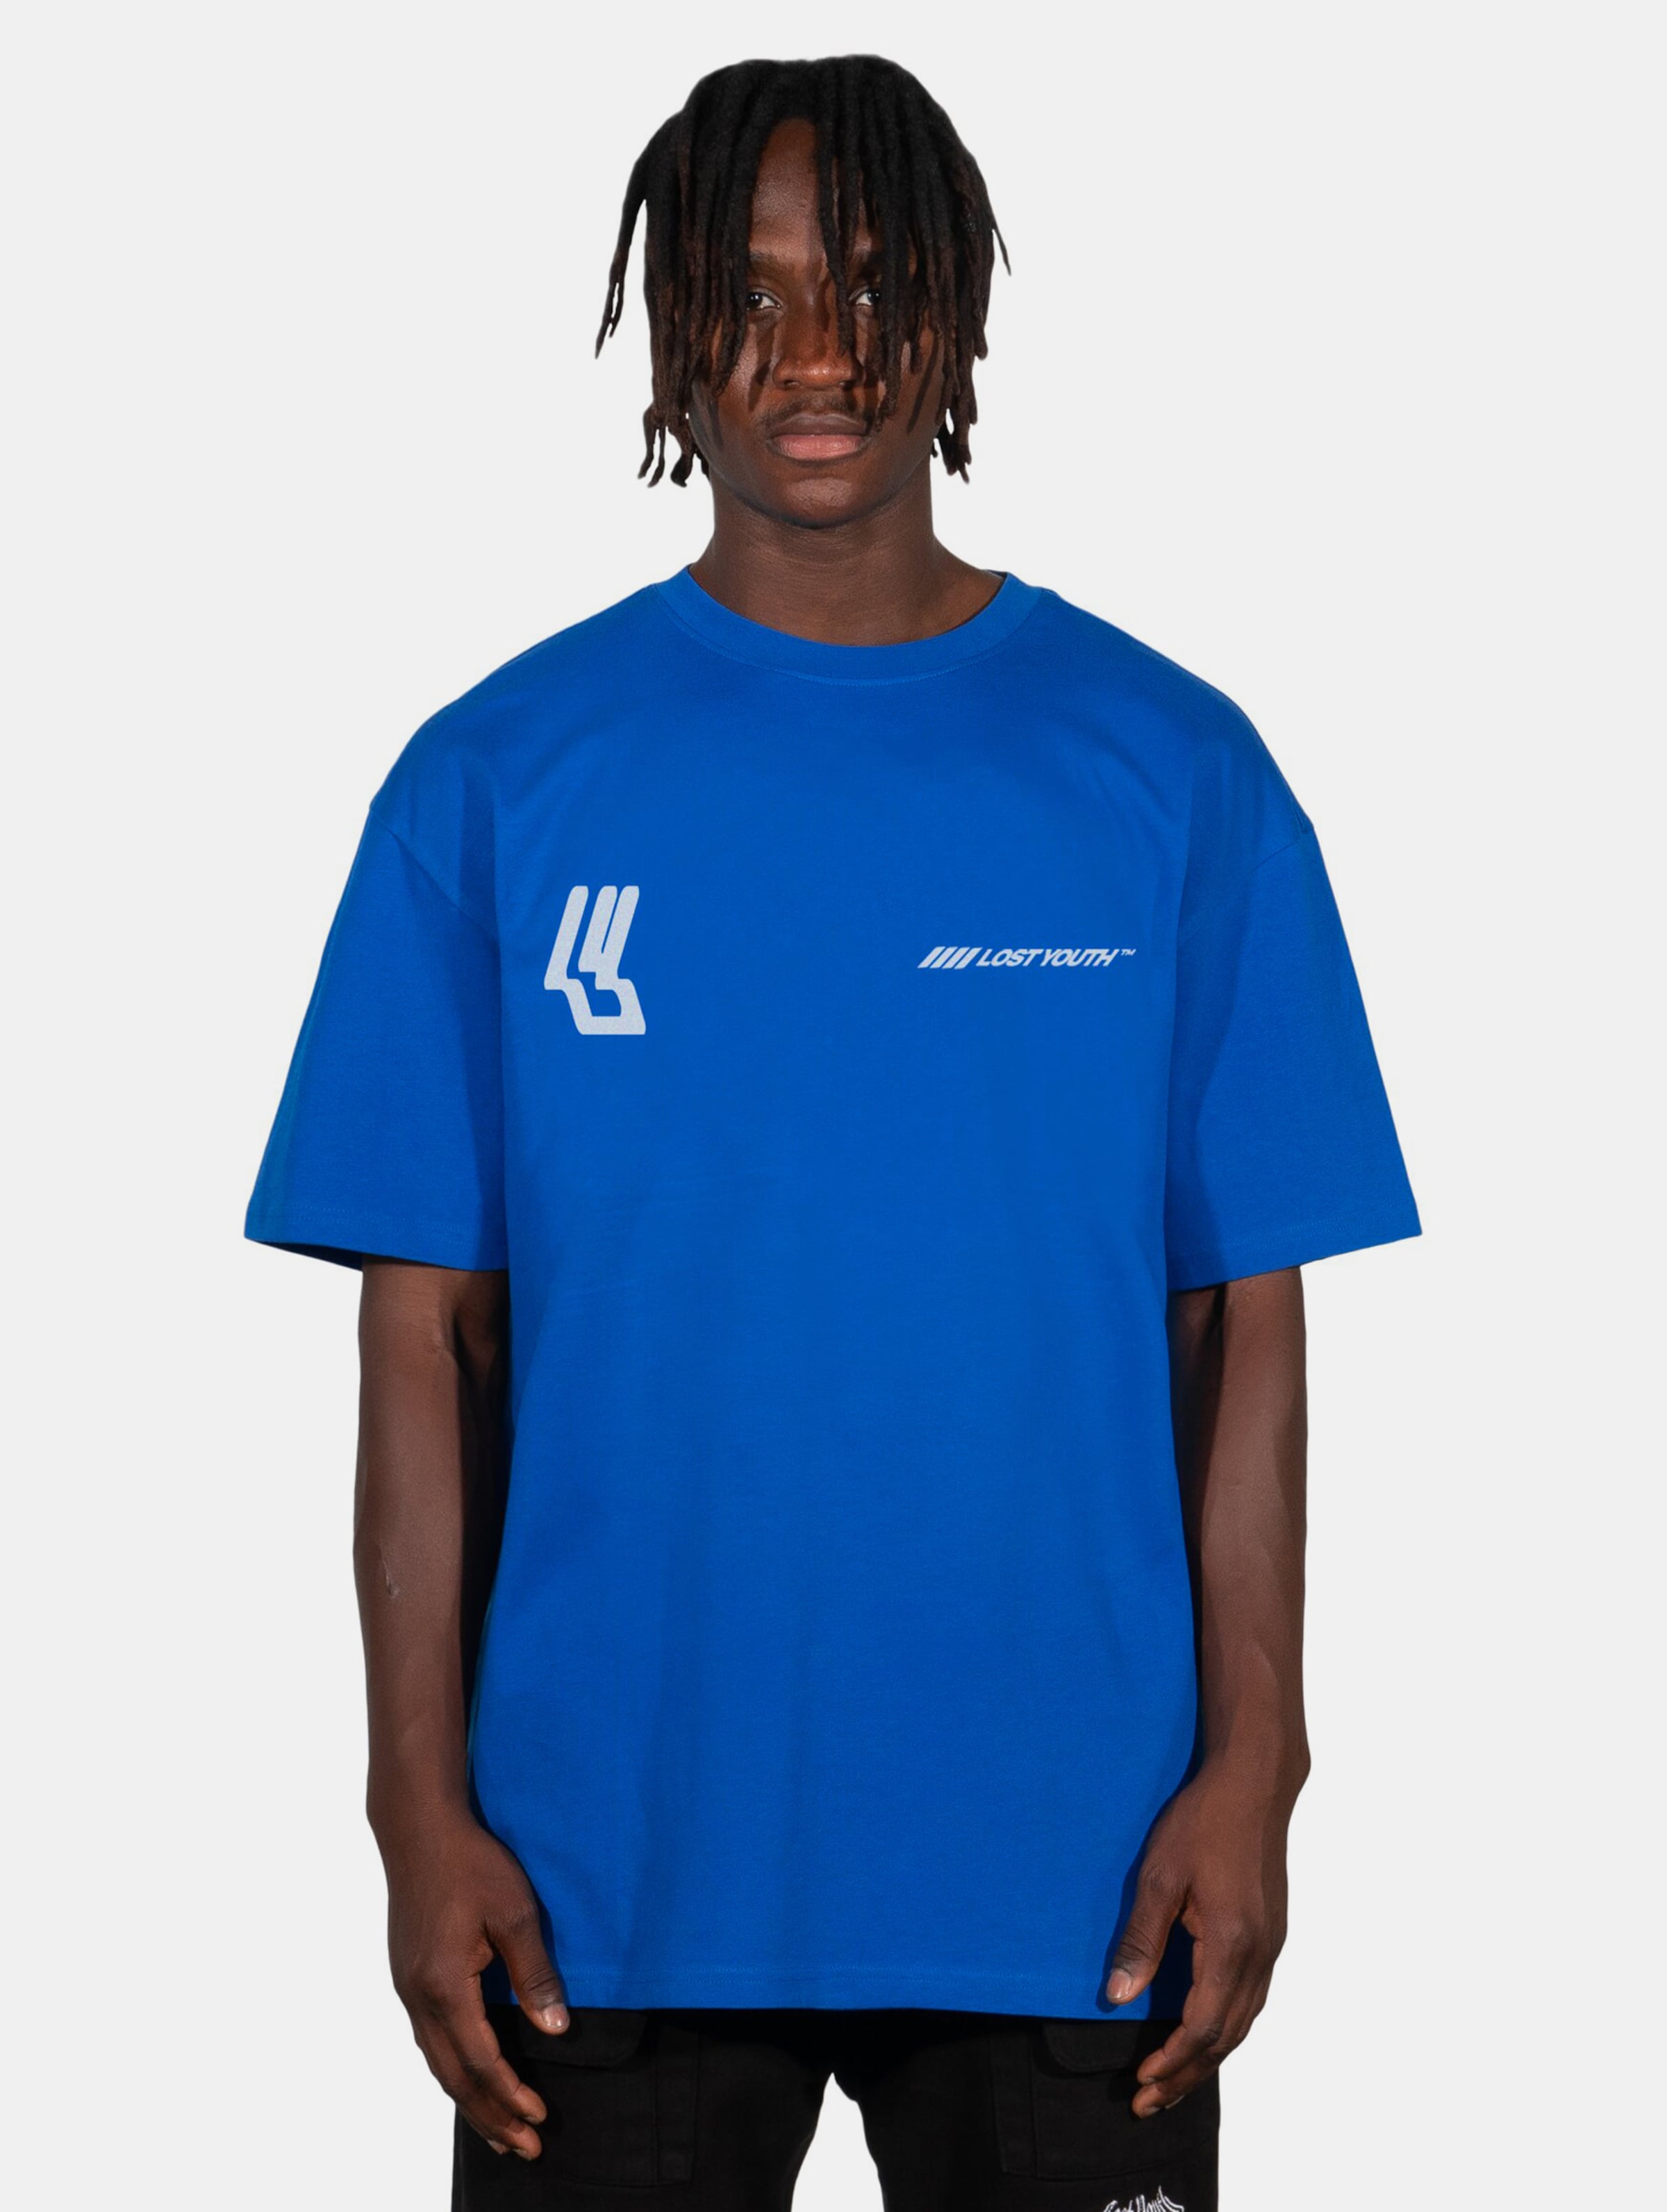 Lost Youth LY TEE- ICON V.2 Männer,Unisex op kleur blauw, Maat XS